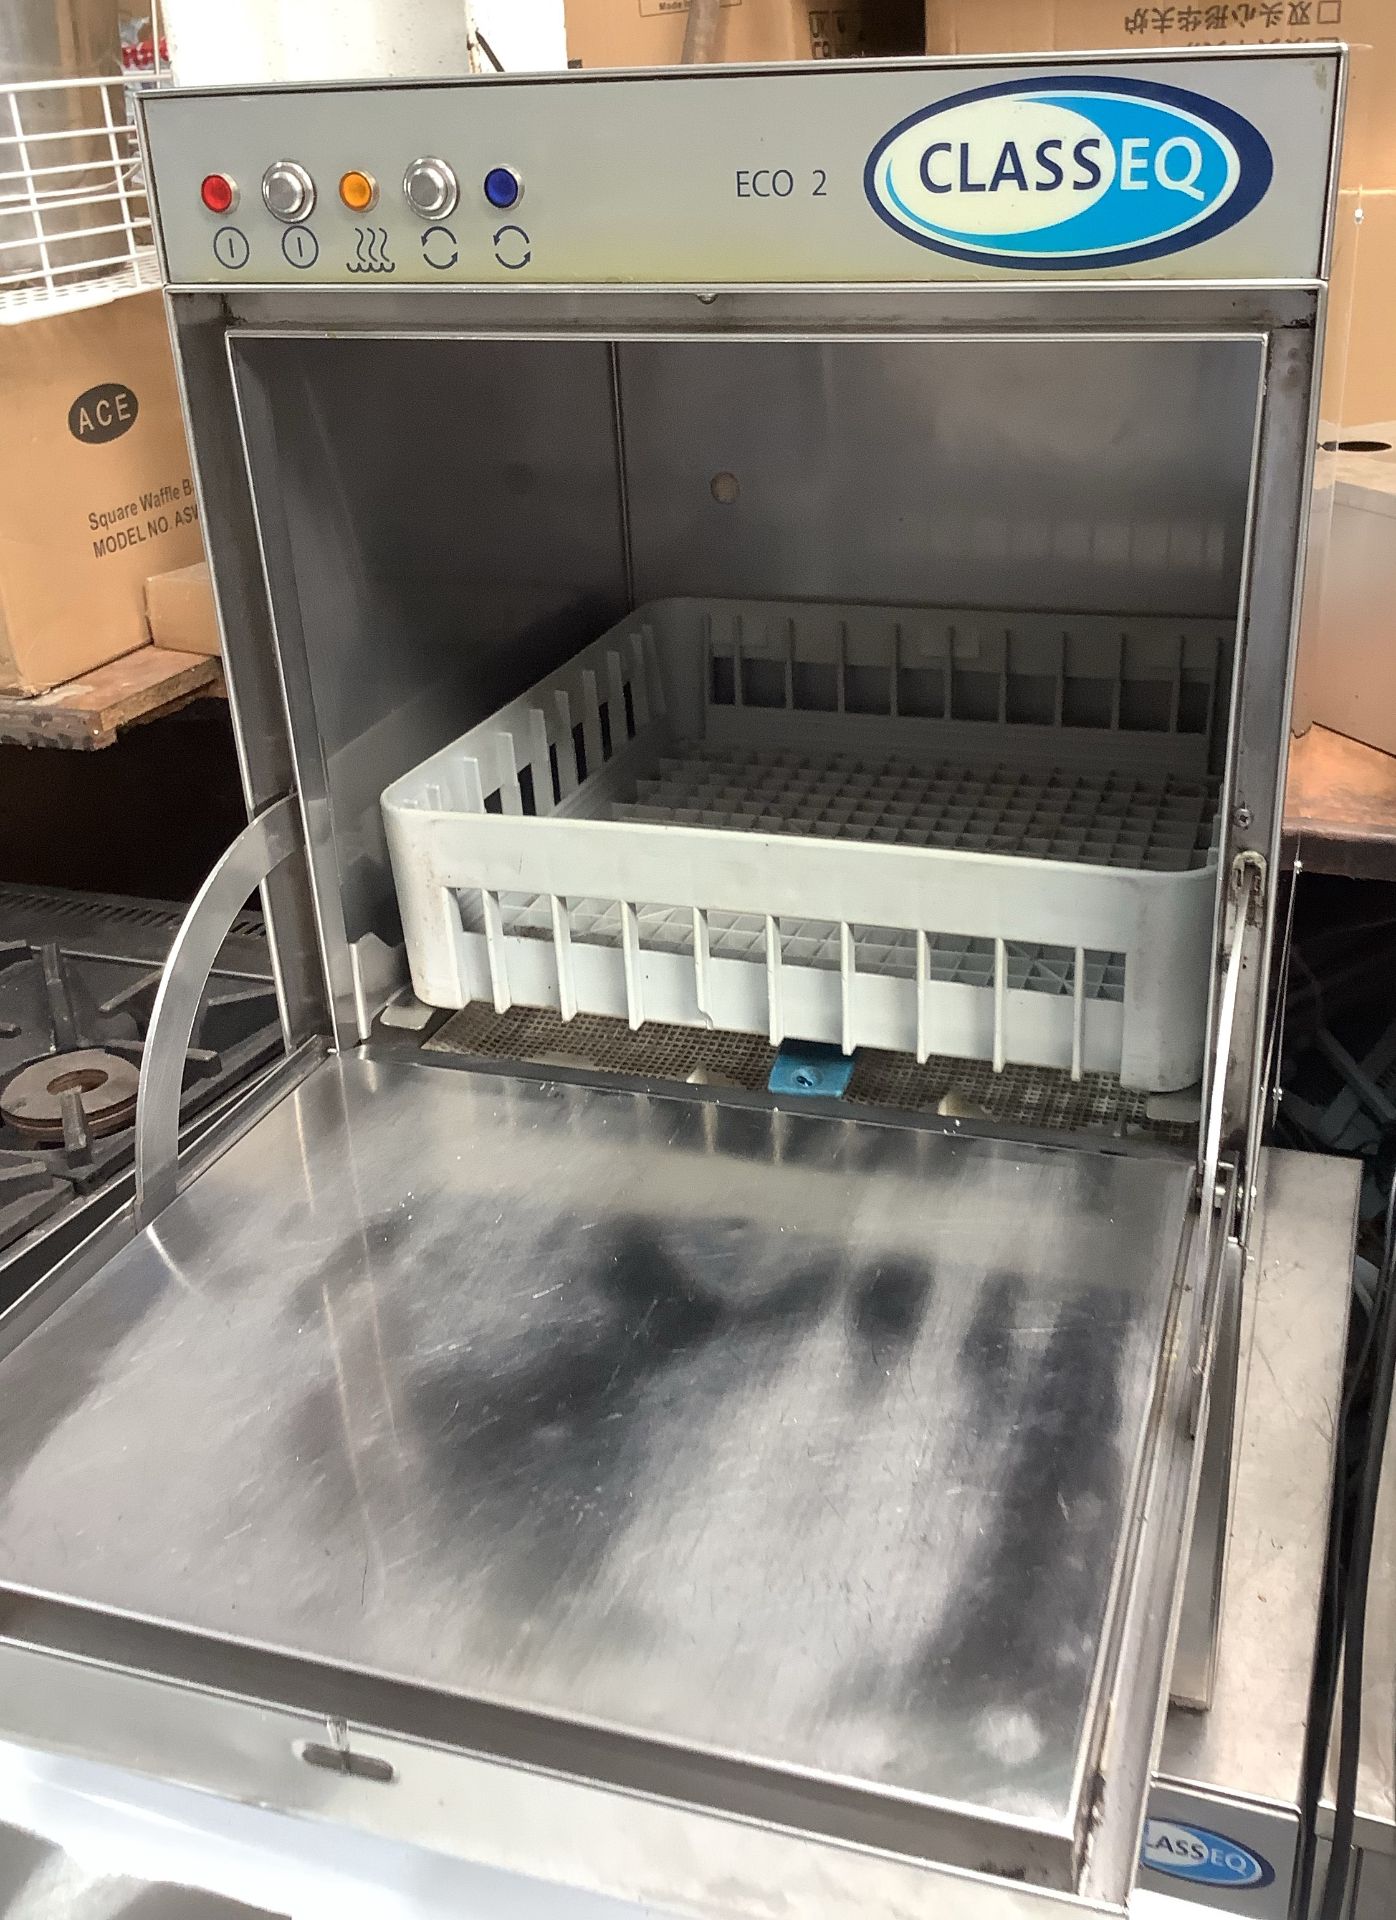 Classeq Eco2 Glass Washer - Image 2 of 2